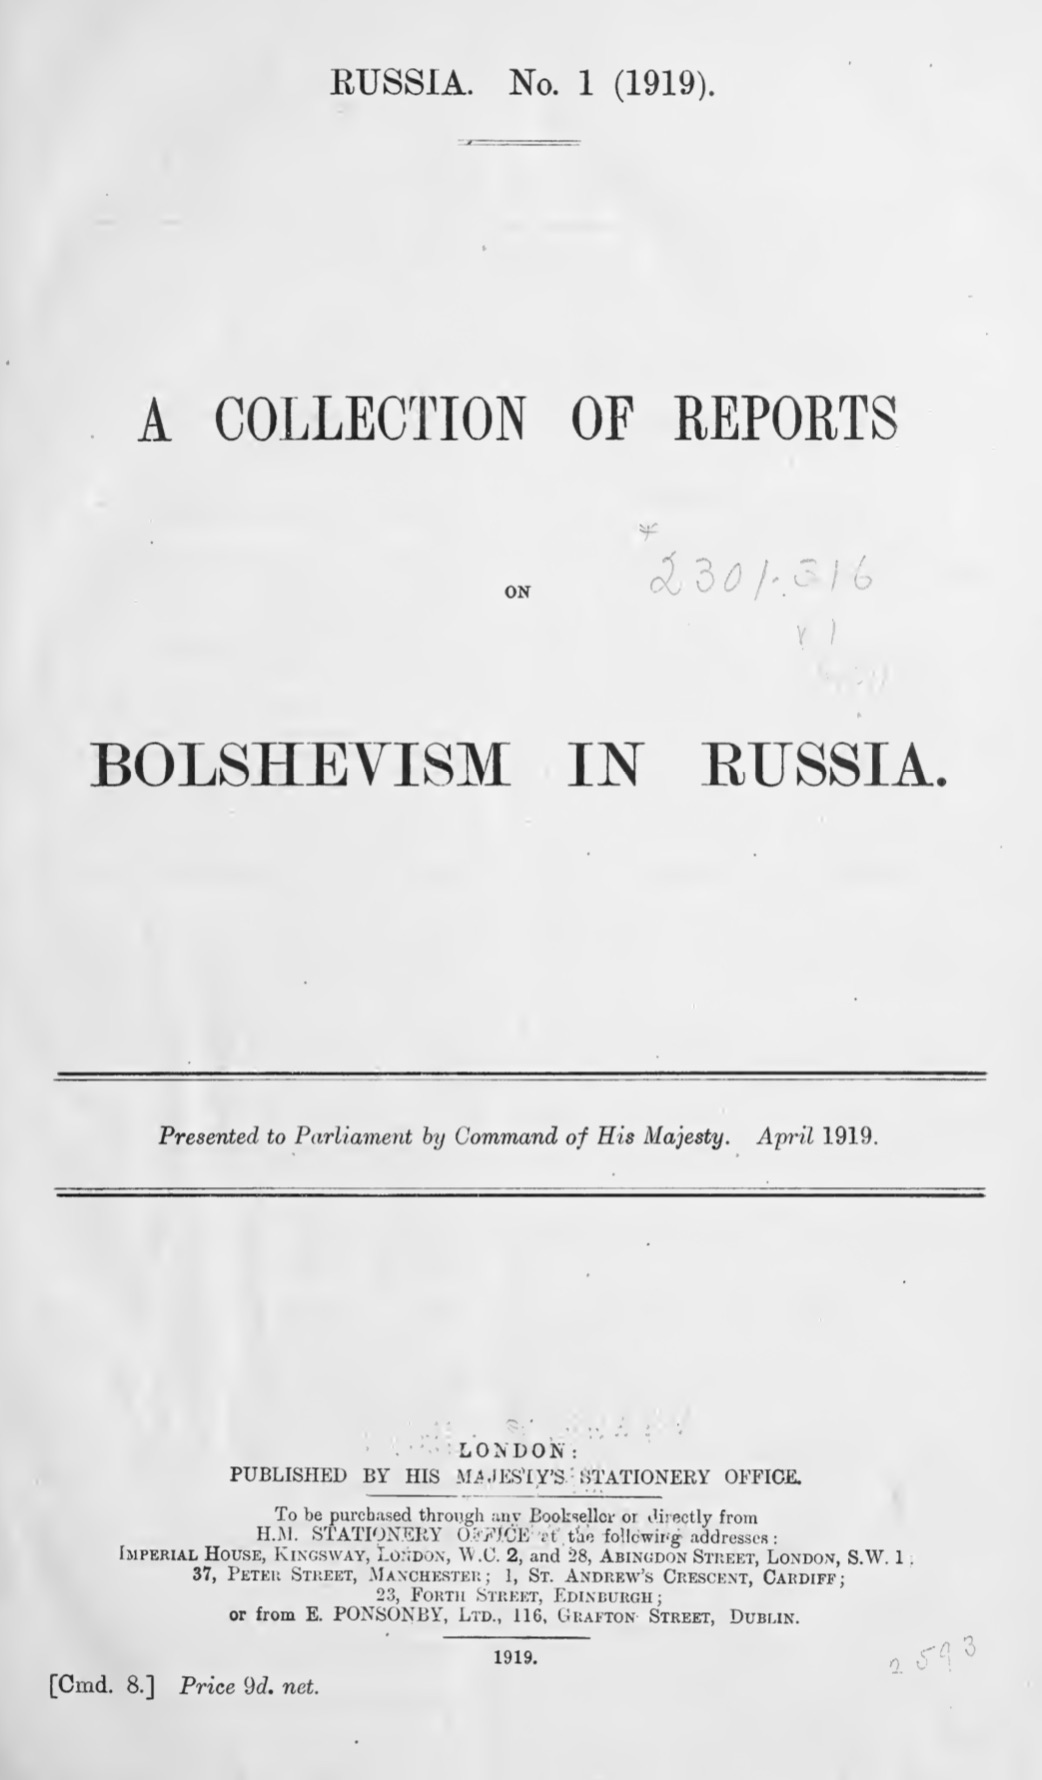 A collection of reports on Bolshevism in Russia (1919) by Foreign Office, Great Britain